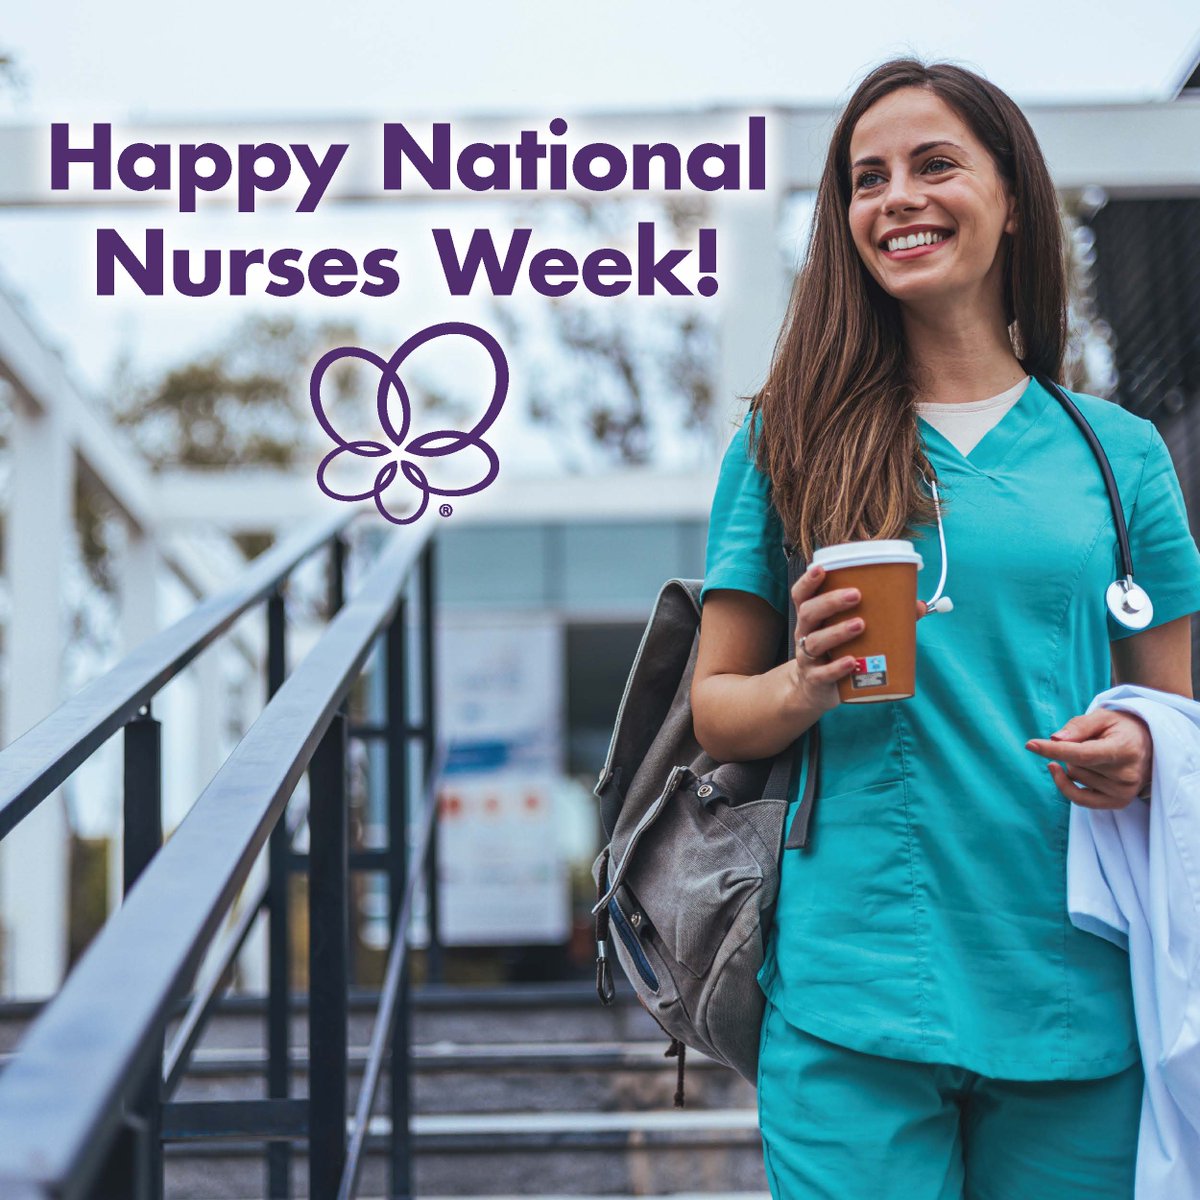 To all the dedicated nurses who bring care, compassion, and expertise to their work every day, thank you. Your tireless efforts in supporting parents and their babies make a world of difference. Here's to celebrating you this week and always! #NationalNursesWeek